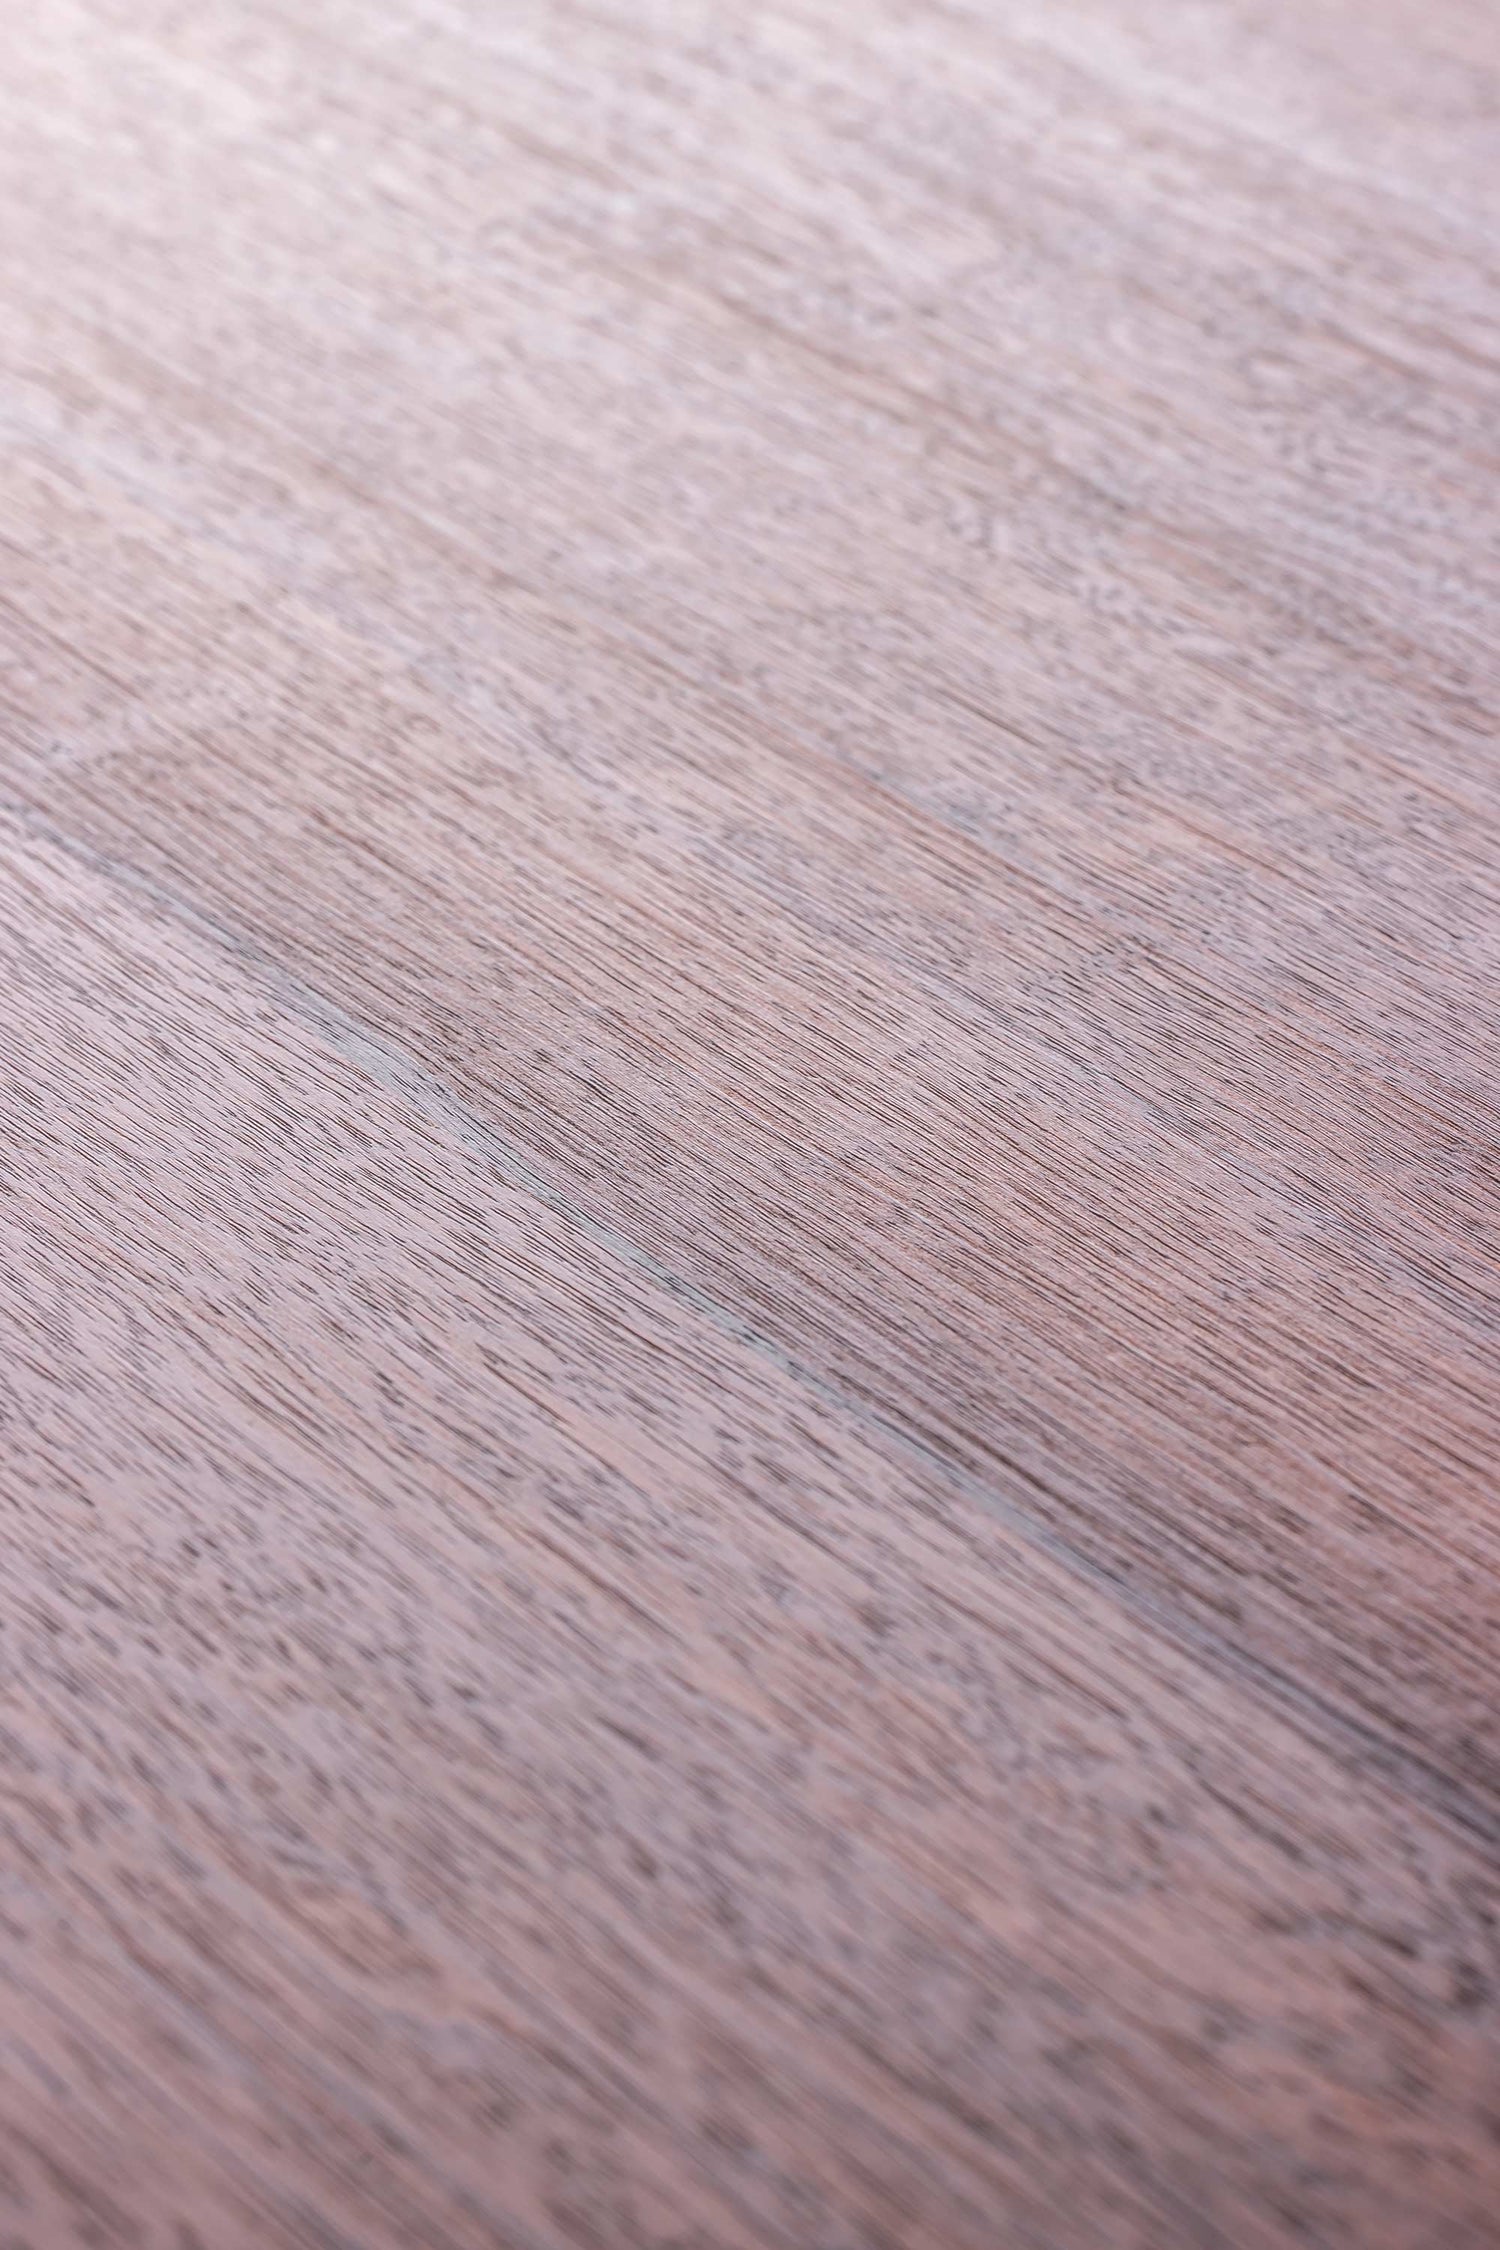 Close up of the Thick Fraké Wood used in the Louza Outdoor Table by Heerenhuis.